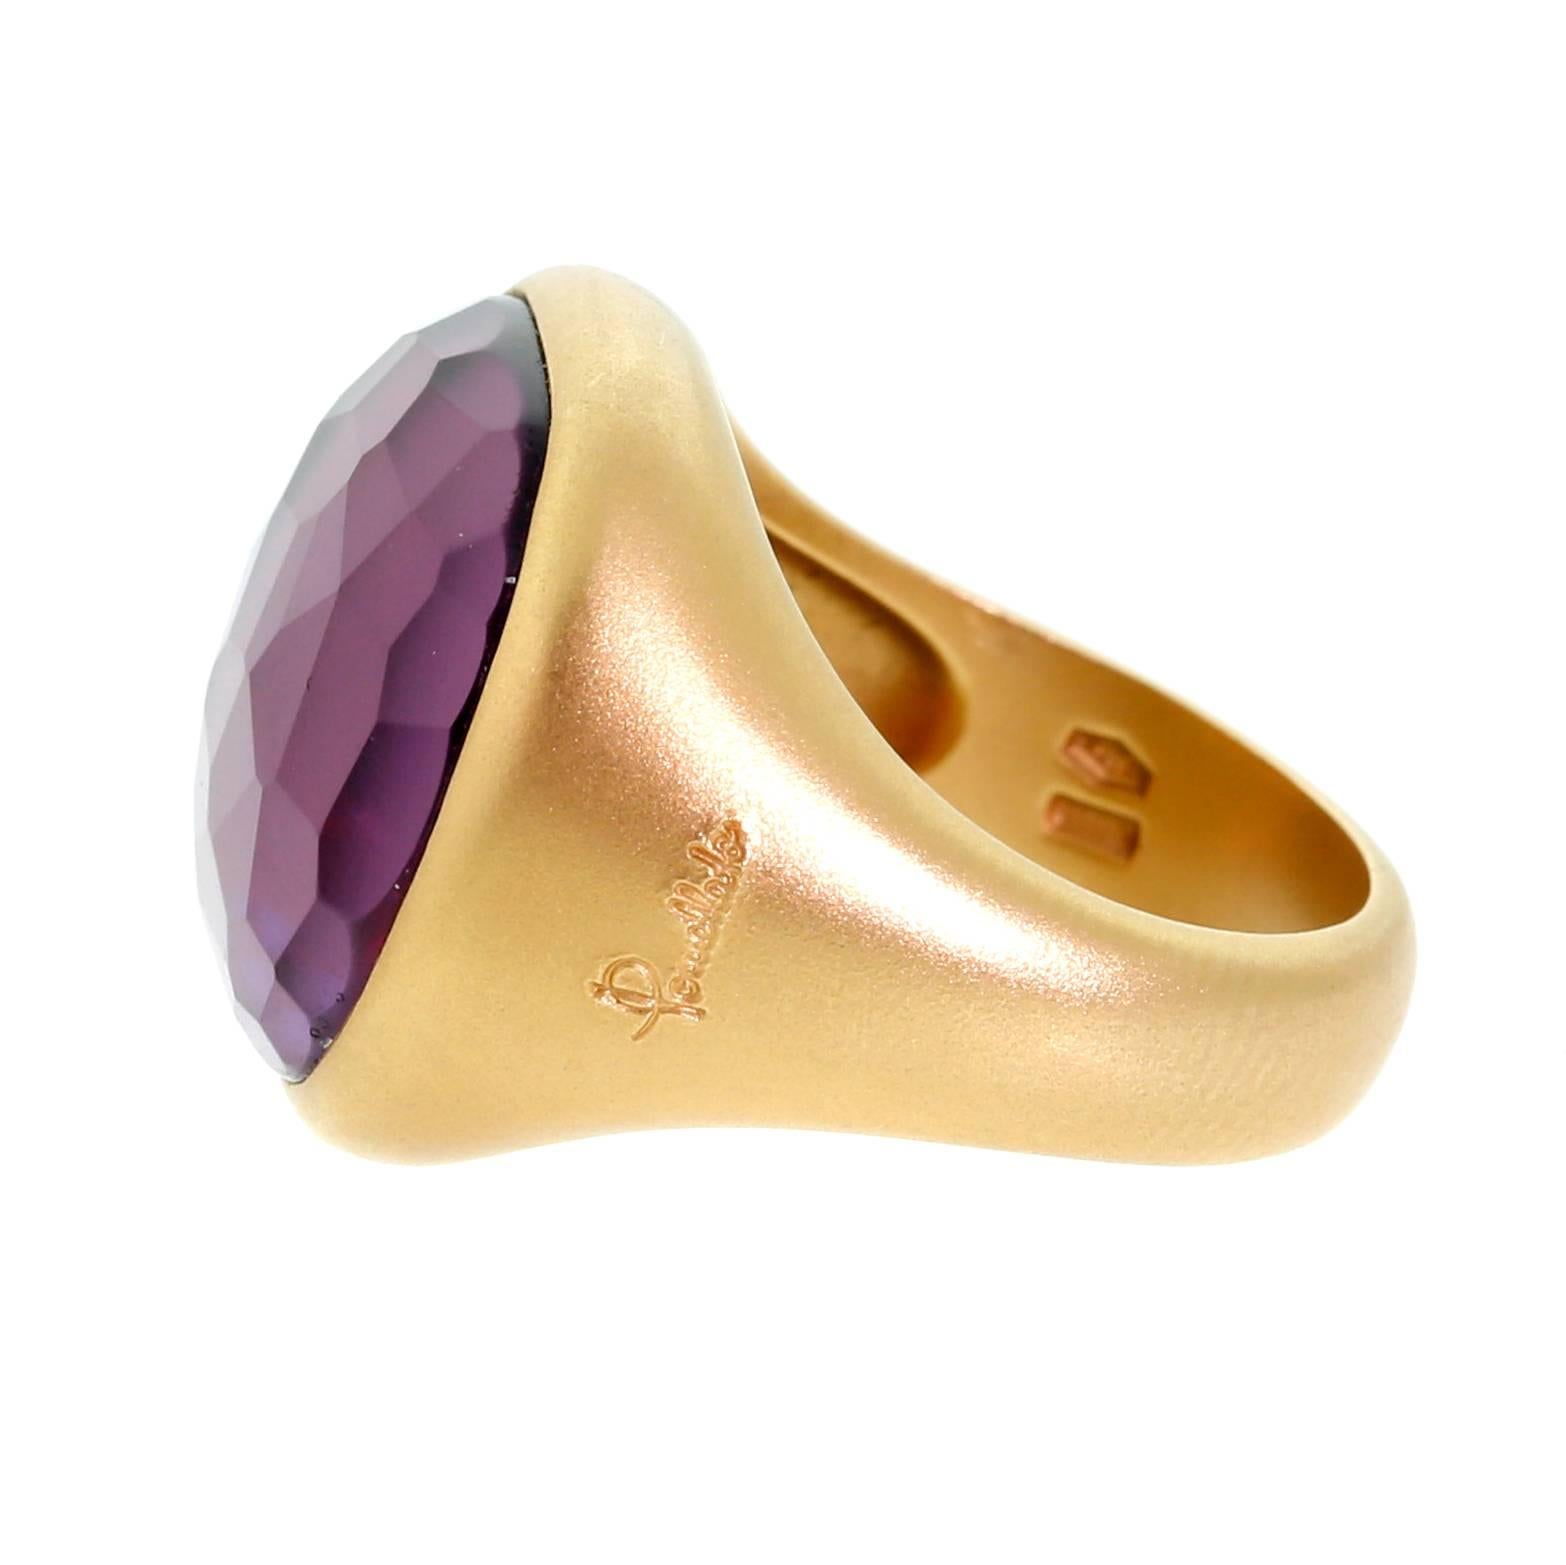 A fabulous Pomellato ring featuring a faceted amethyst stone set in 18k rose gold. Size 6.25  Pomellato Retail: 5500 + Tax

This magnificent piece is offered by Opulent Jewelers, we are an accredited boutique dedicated to sharing our passion for